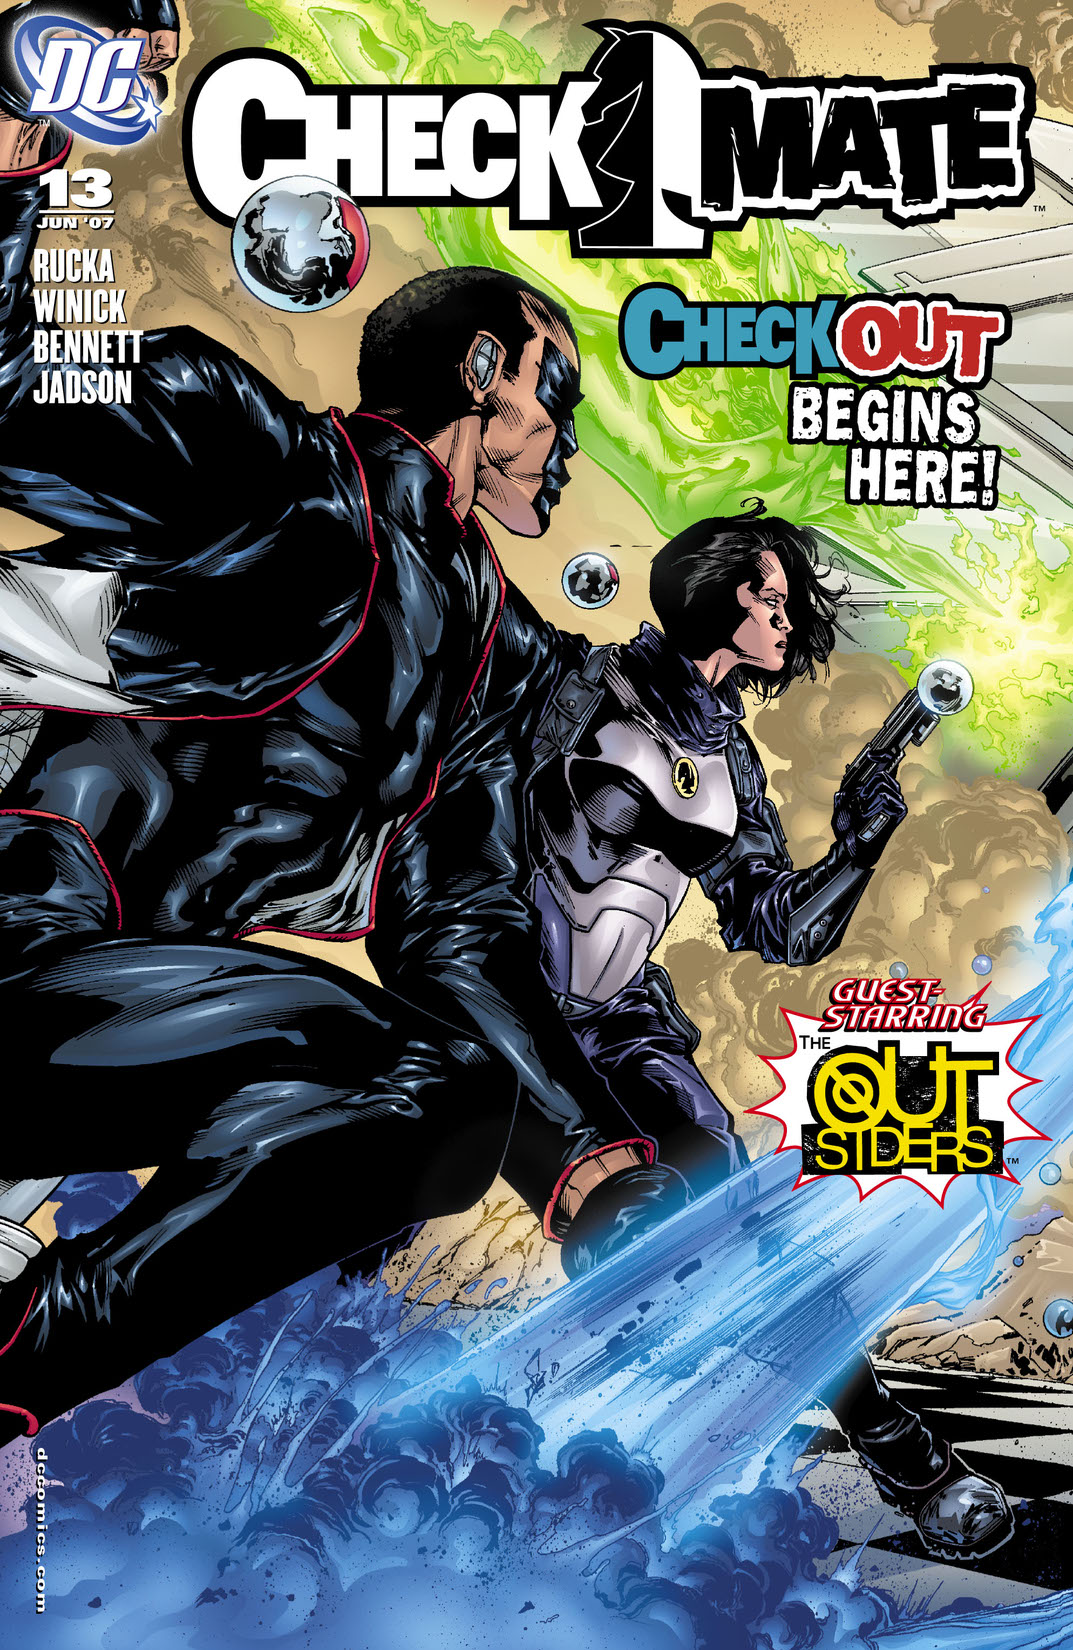 Checkmate (2006-) #13 preview images